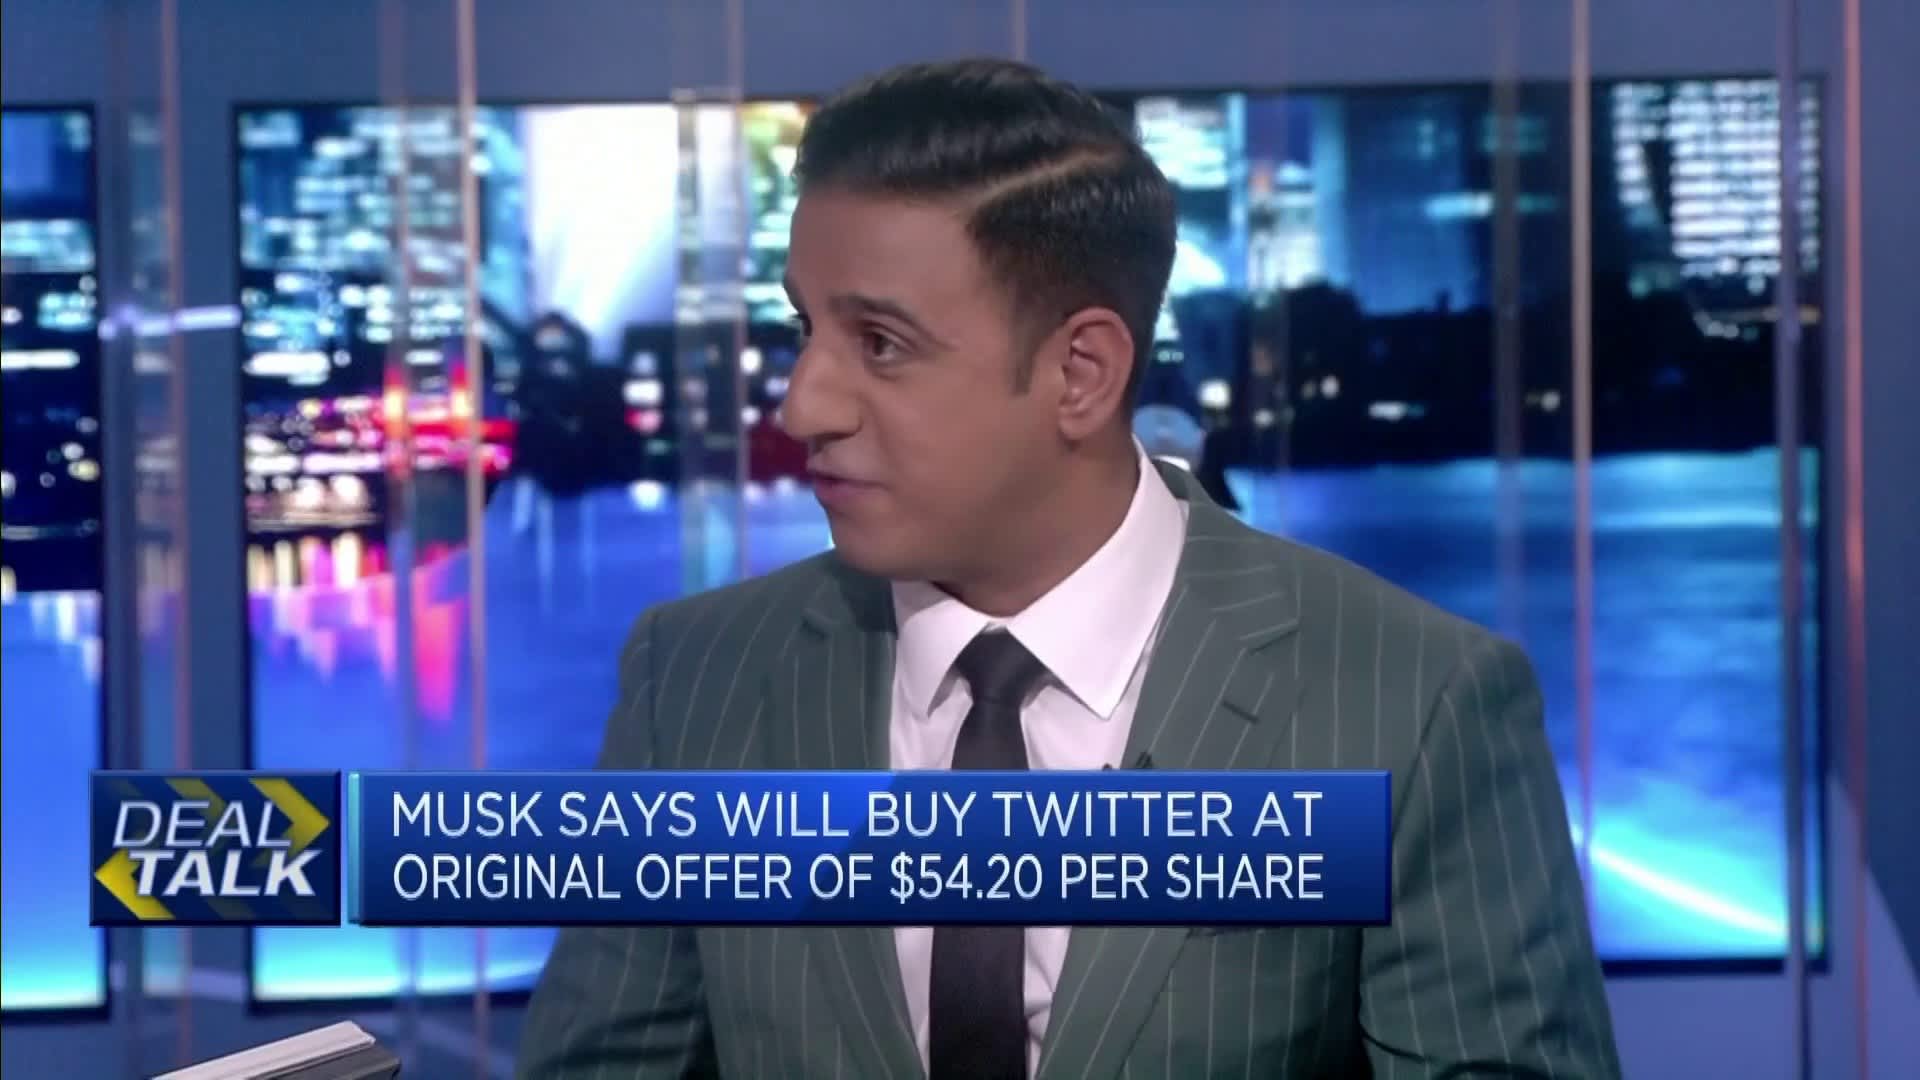 Musk says the Twitter deal is a way to accelerate 'X, the everything app'